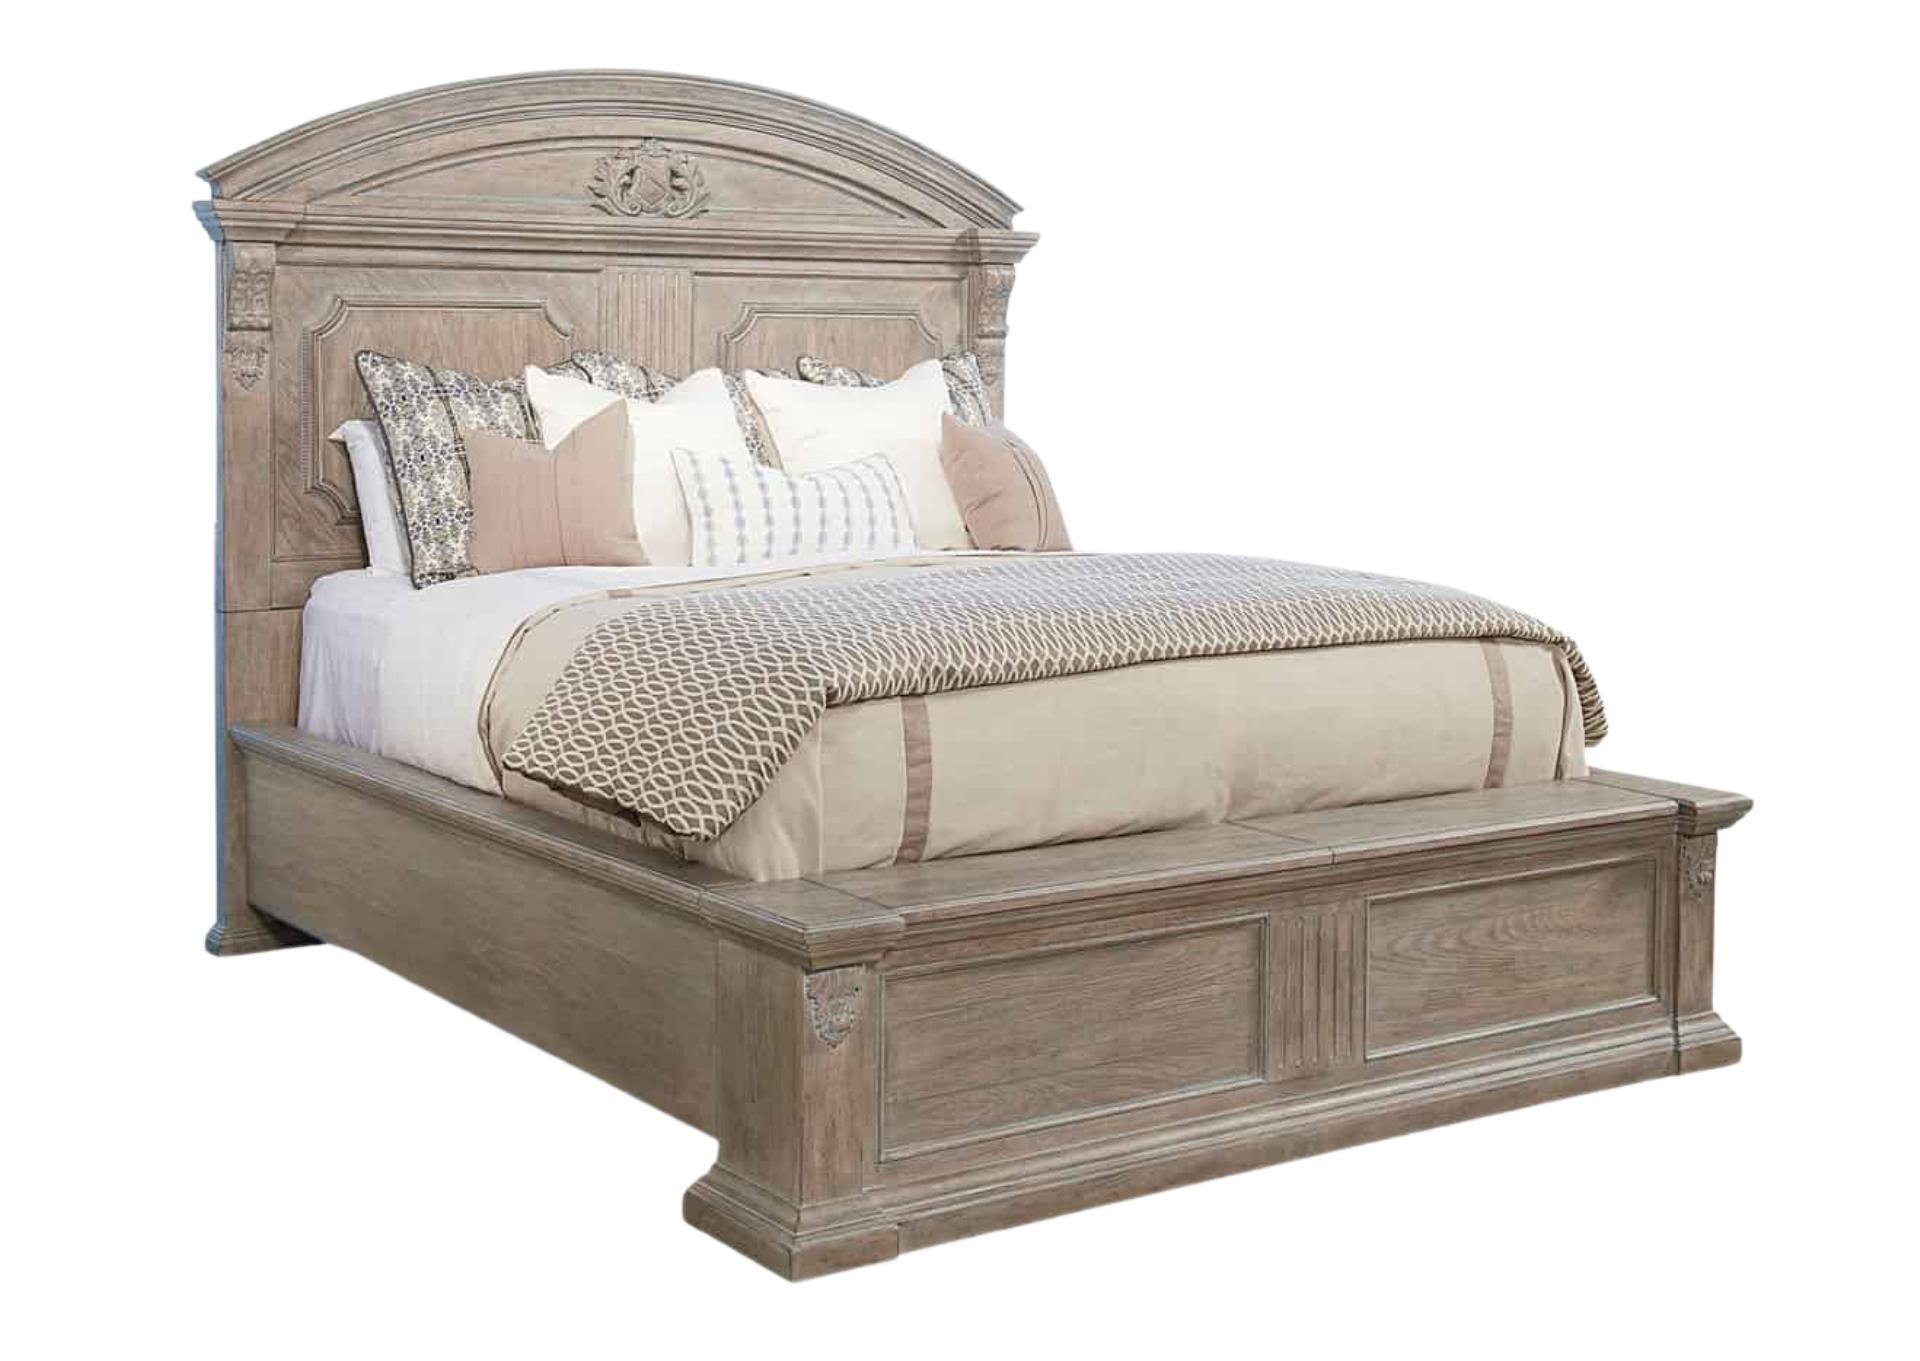 ARCH SALVAGE CHAMBERS KING BED